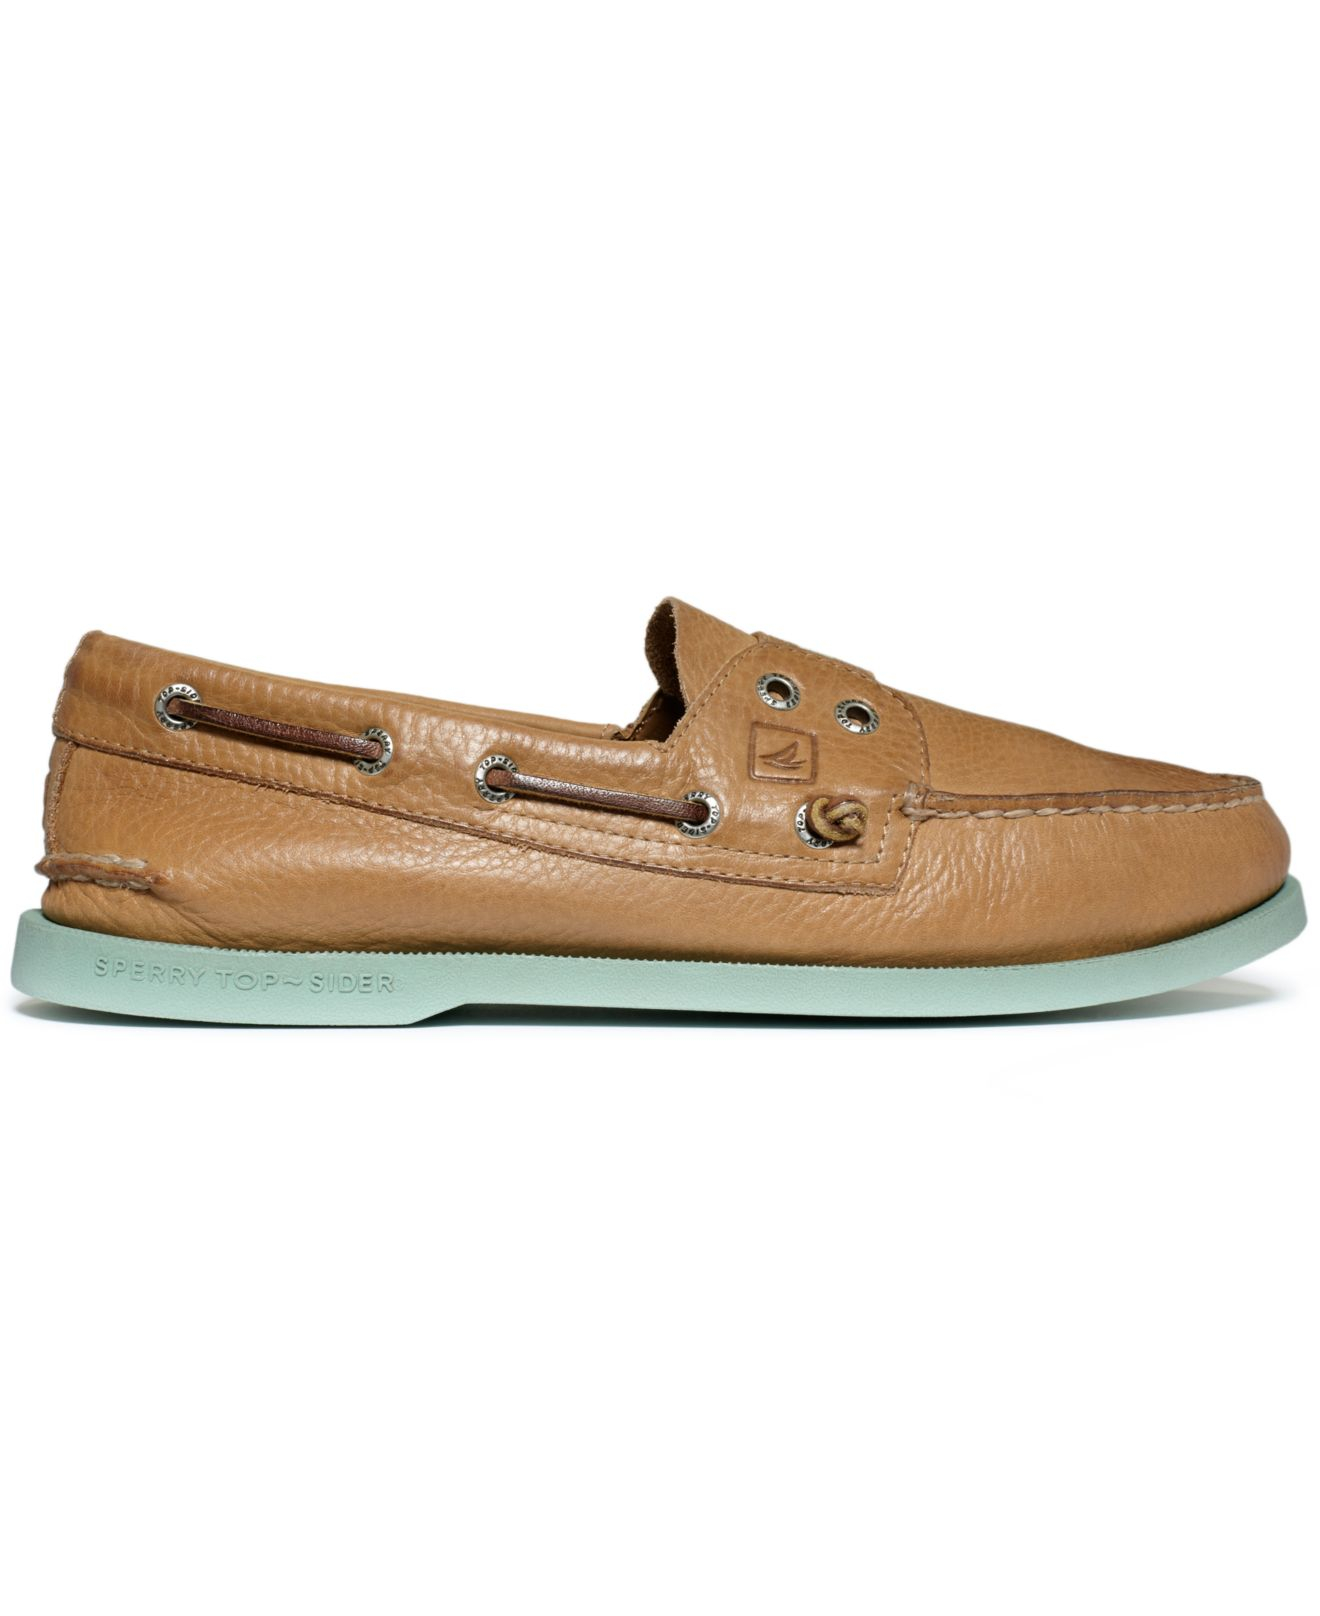 Lyst - Sperry Top-Sider Authentic Original A/O Gore Colored Sole Boat ...